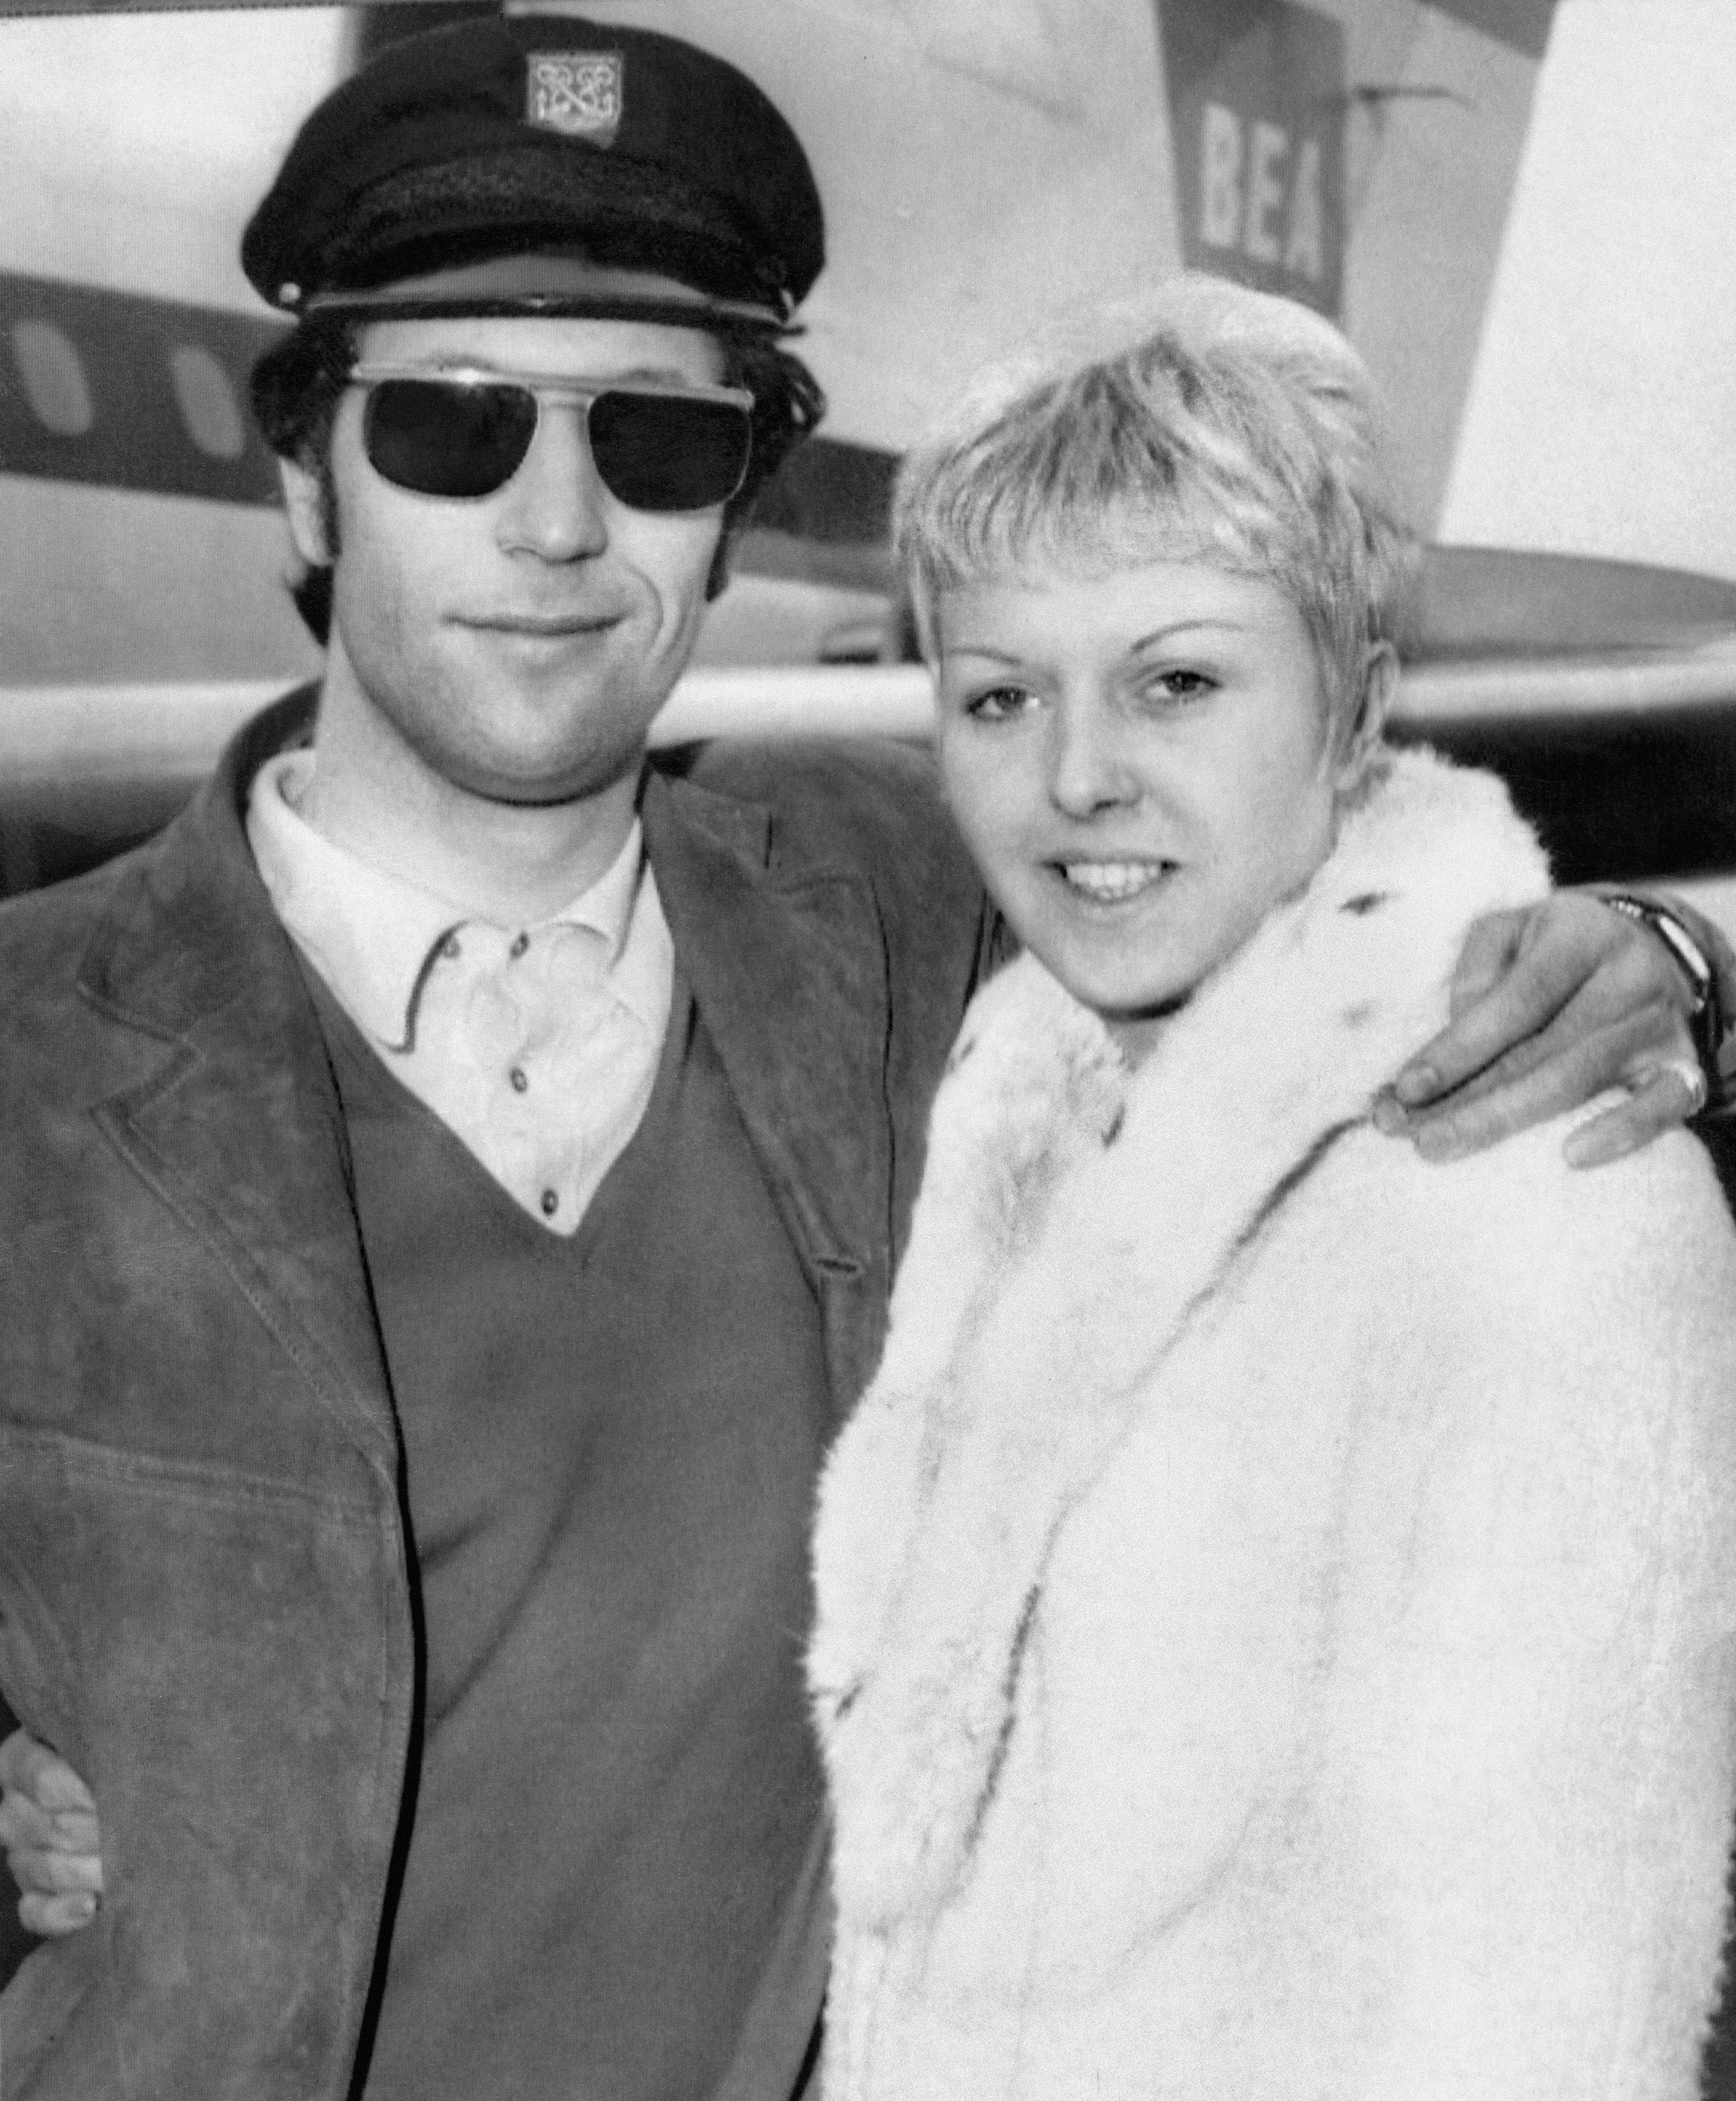 Tom Jones pictured with his wife Melinda "Linda" Woodward after arriving from France on April 8, 1965 | Source: Getty Images